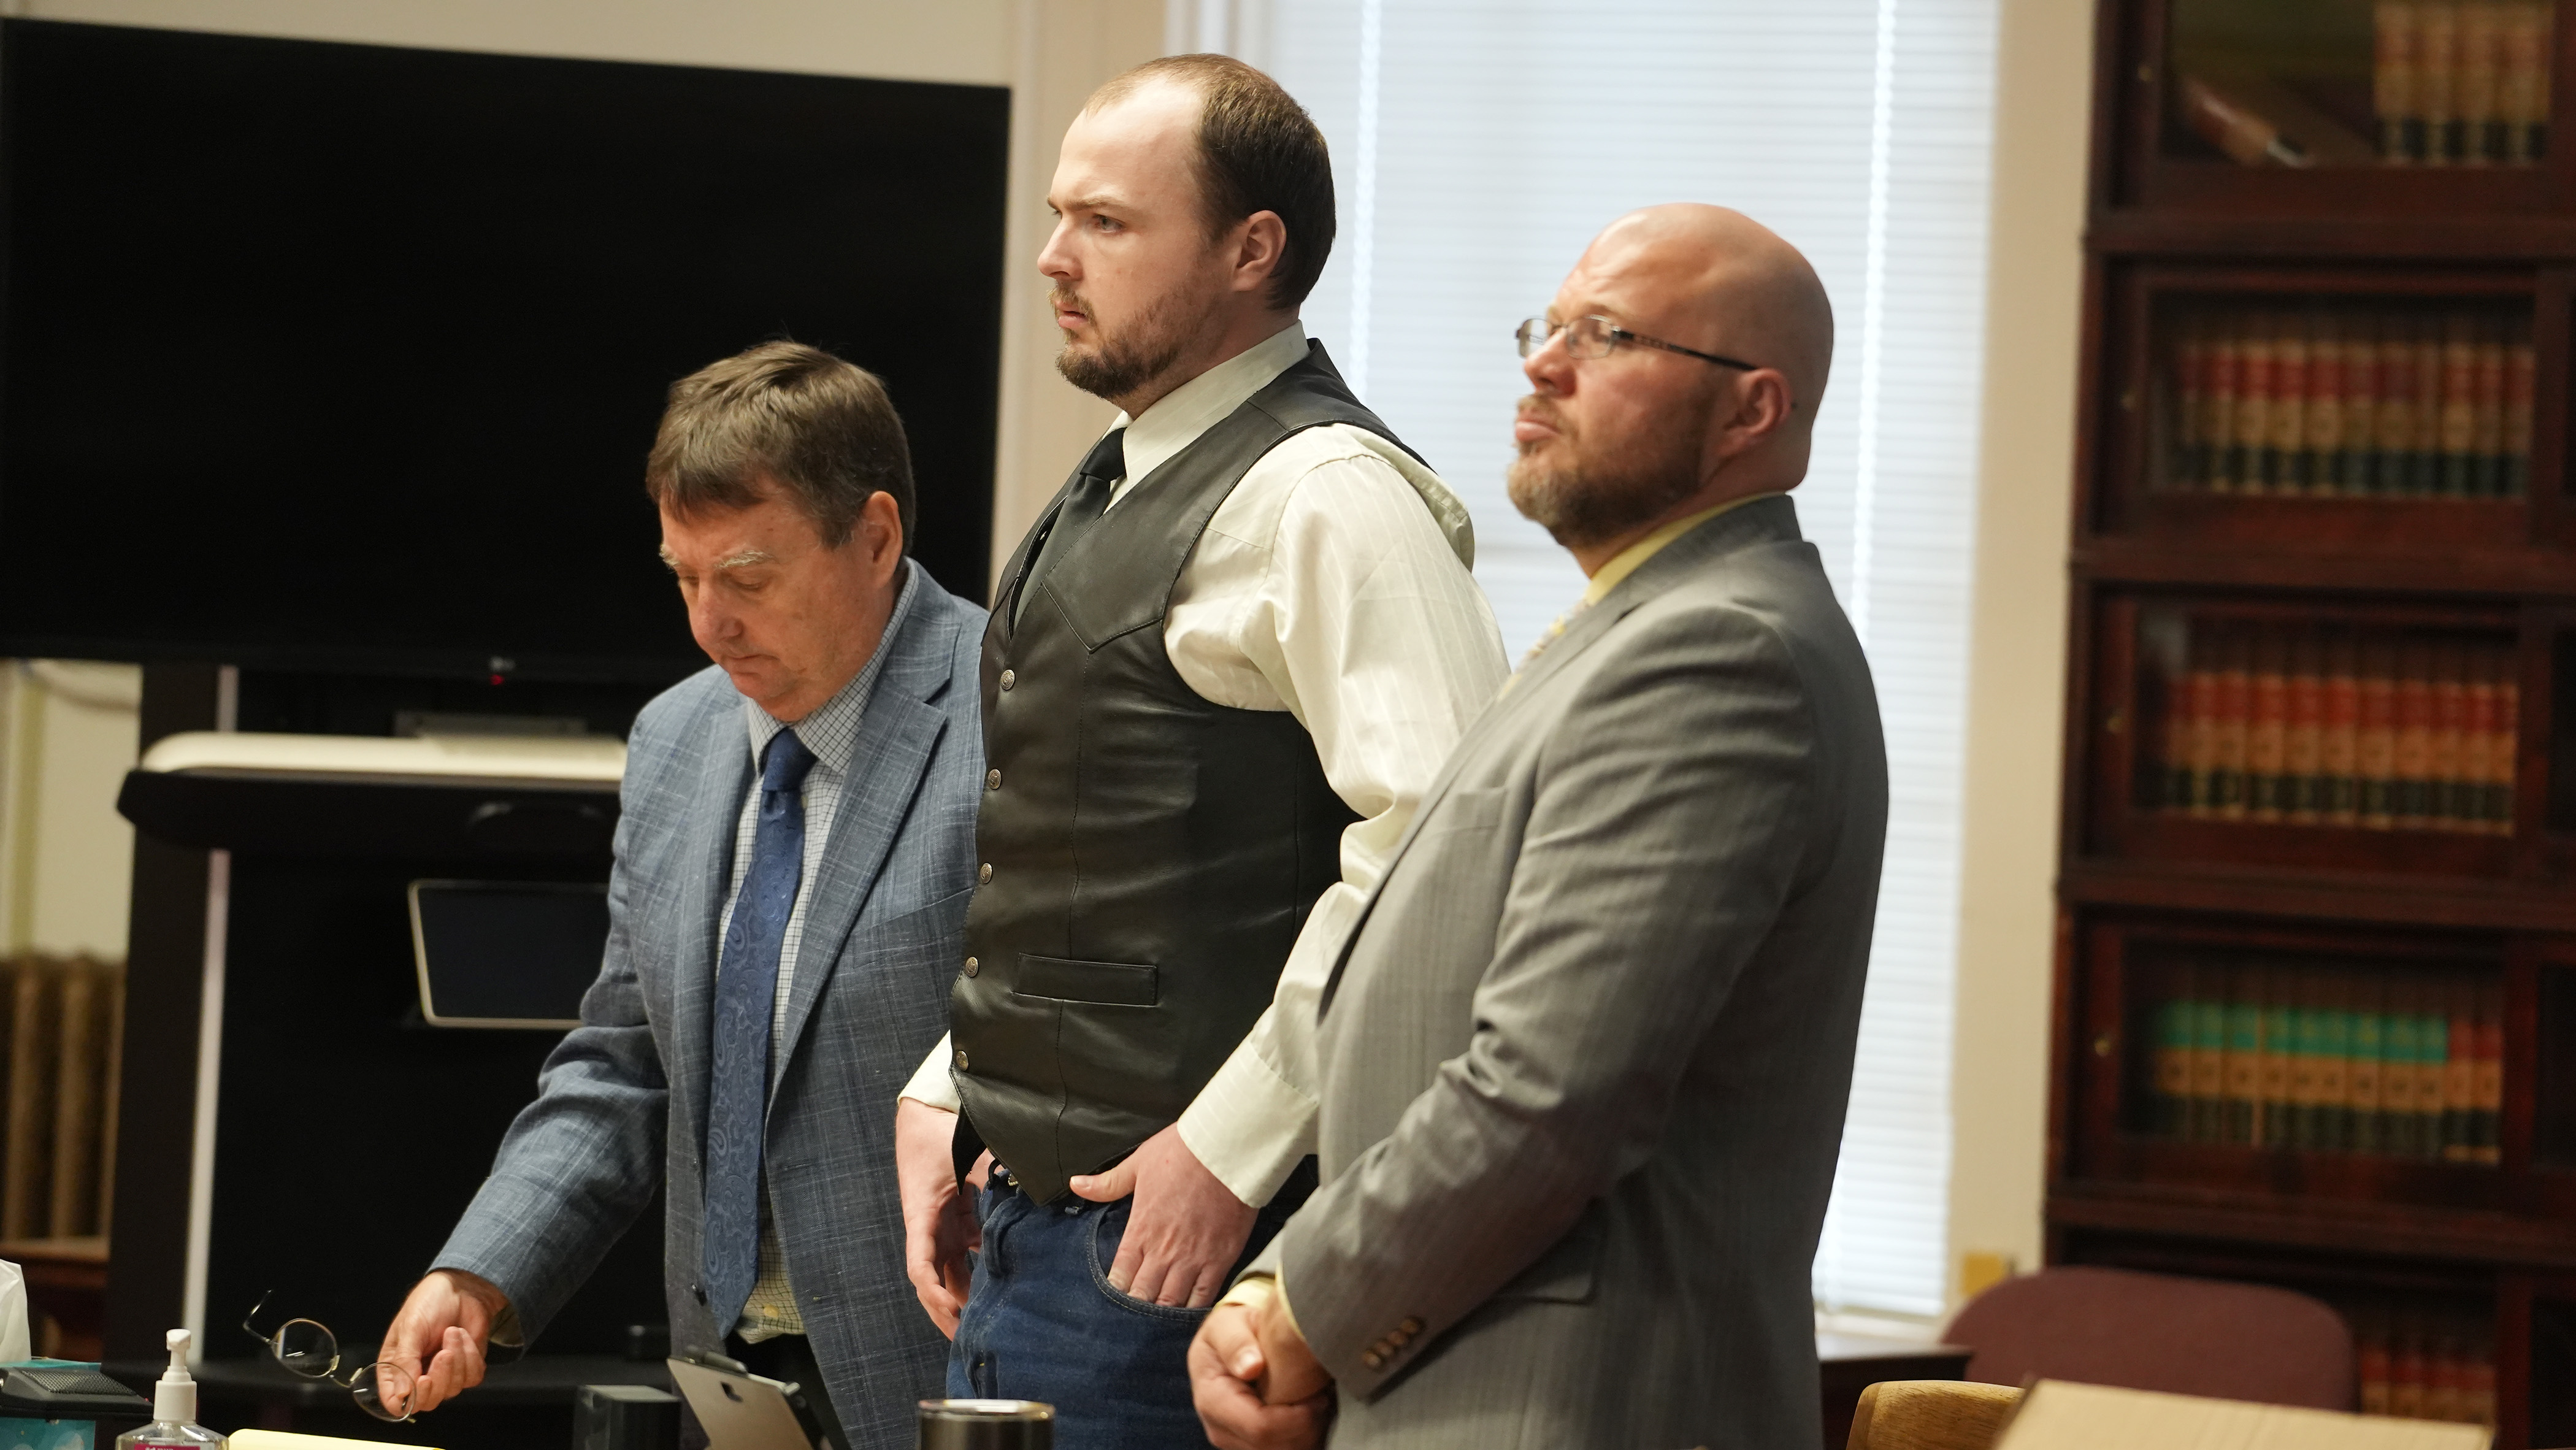 Pike County murder trial defense requests mistrial after recording played;  judge says no